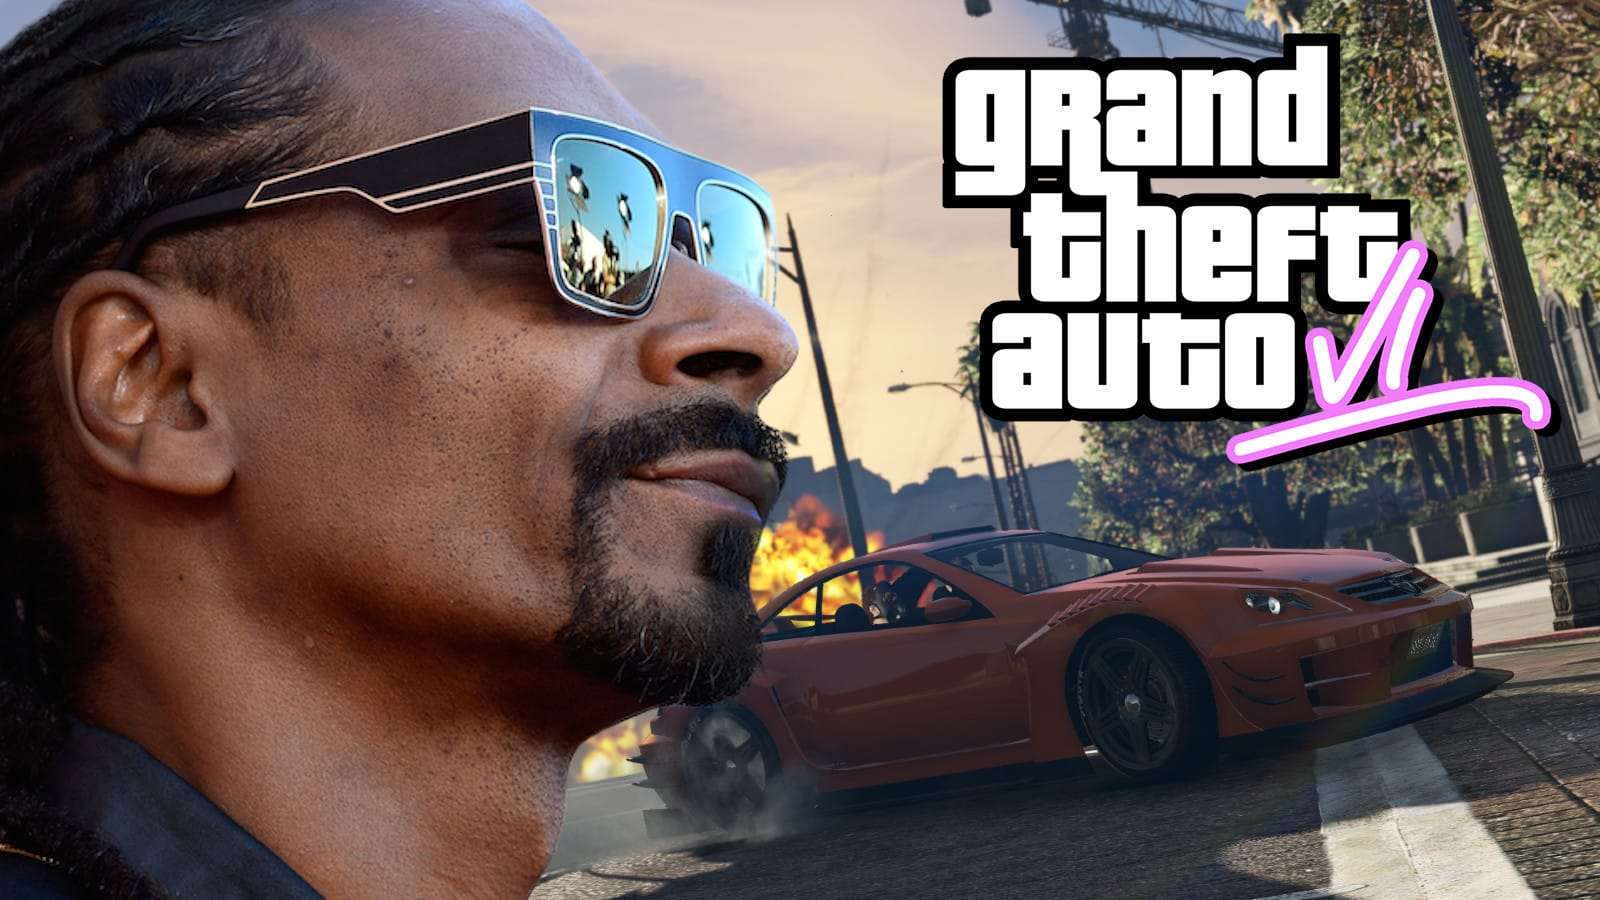 Snoop Dogg says Dr Dre working on GTA music